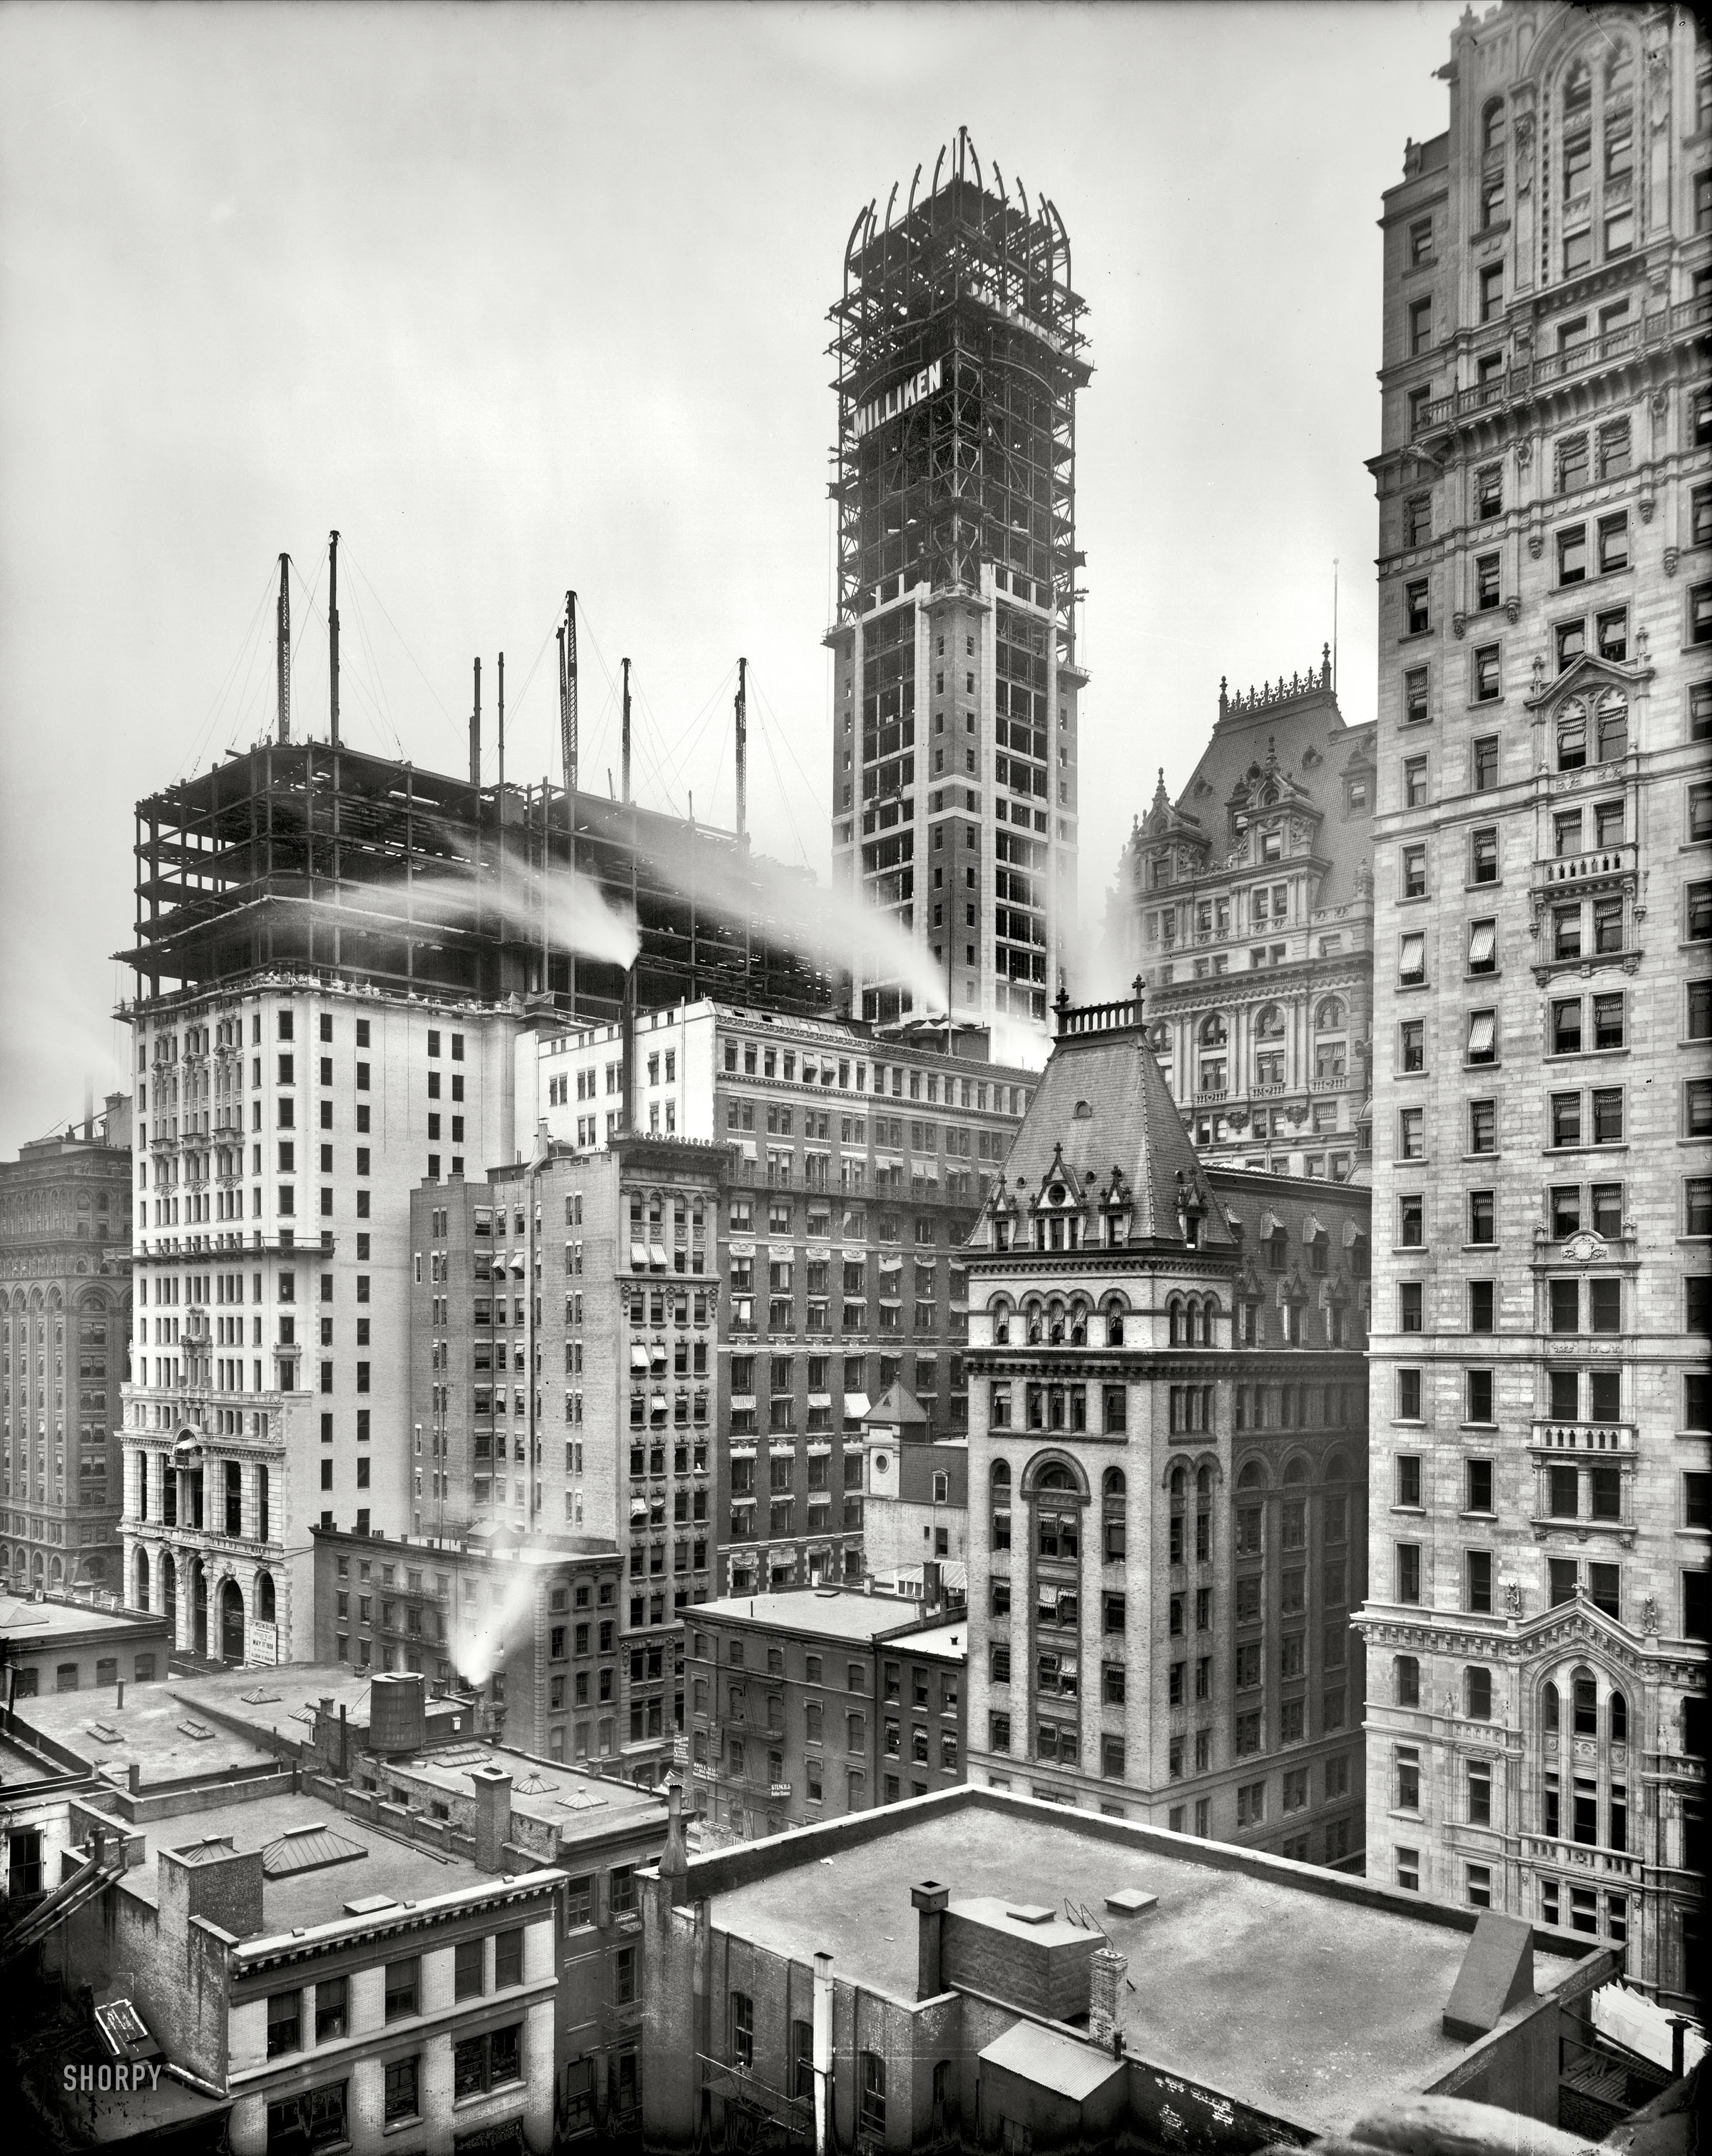 New York circa 1907. "Singer Building under construction." 8x10 inch dry plate glass negative, Detroit Publishing Company. View full size.